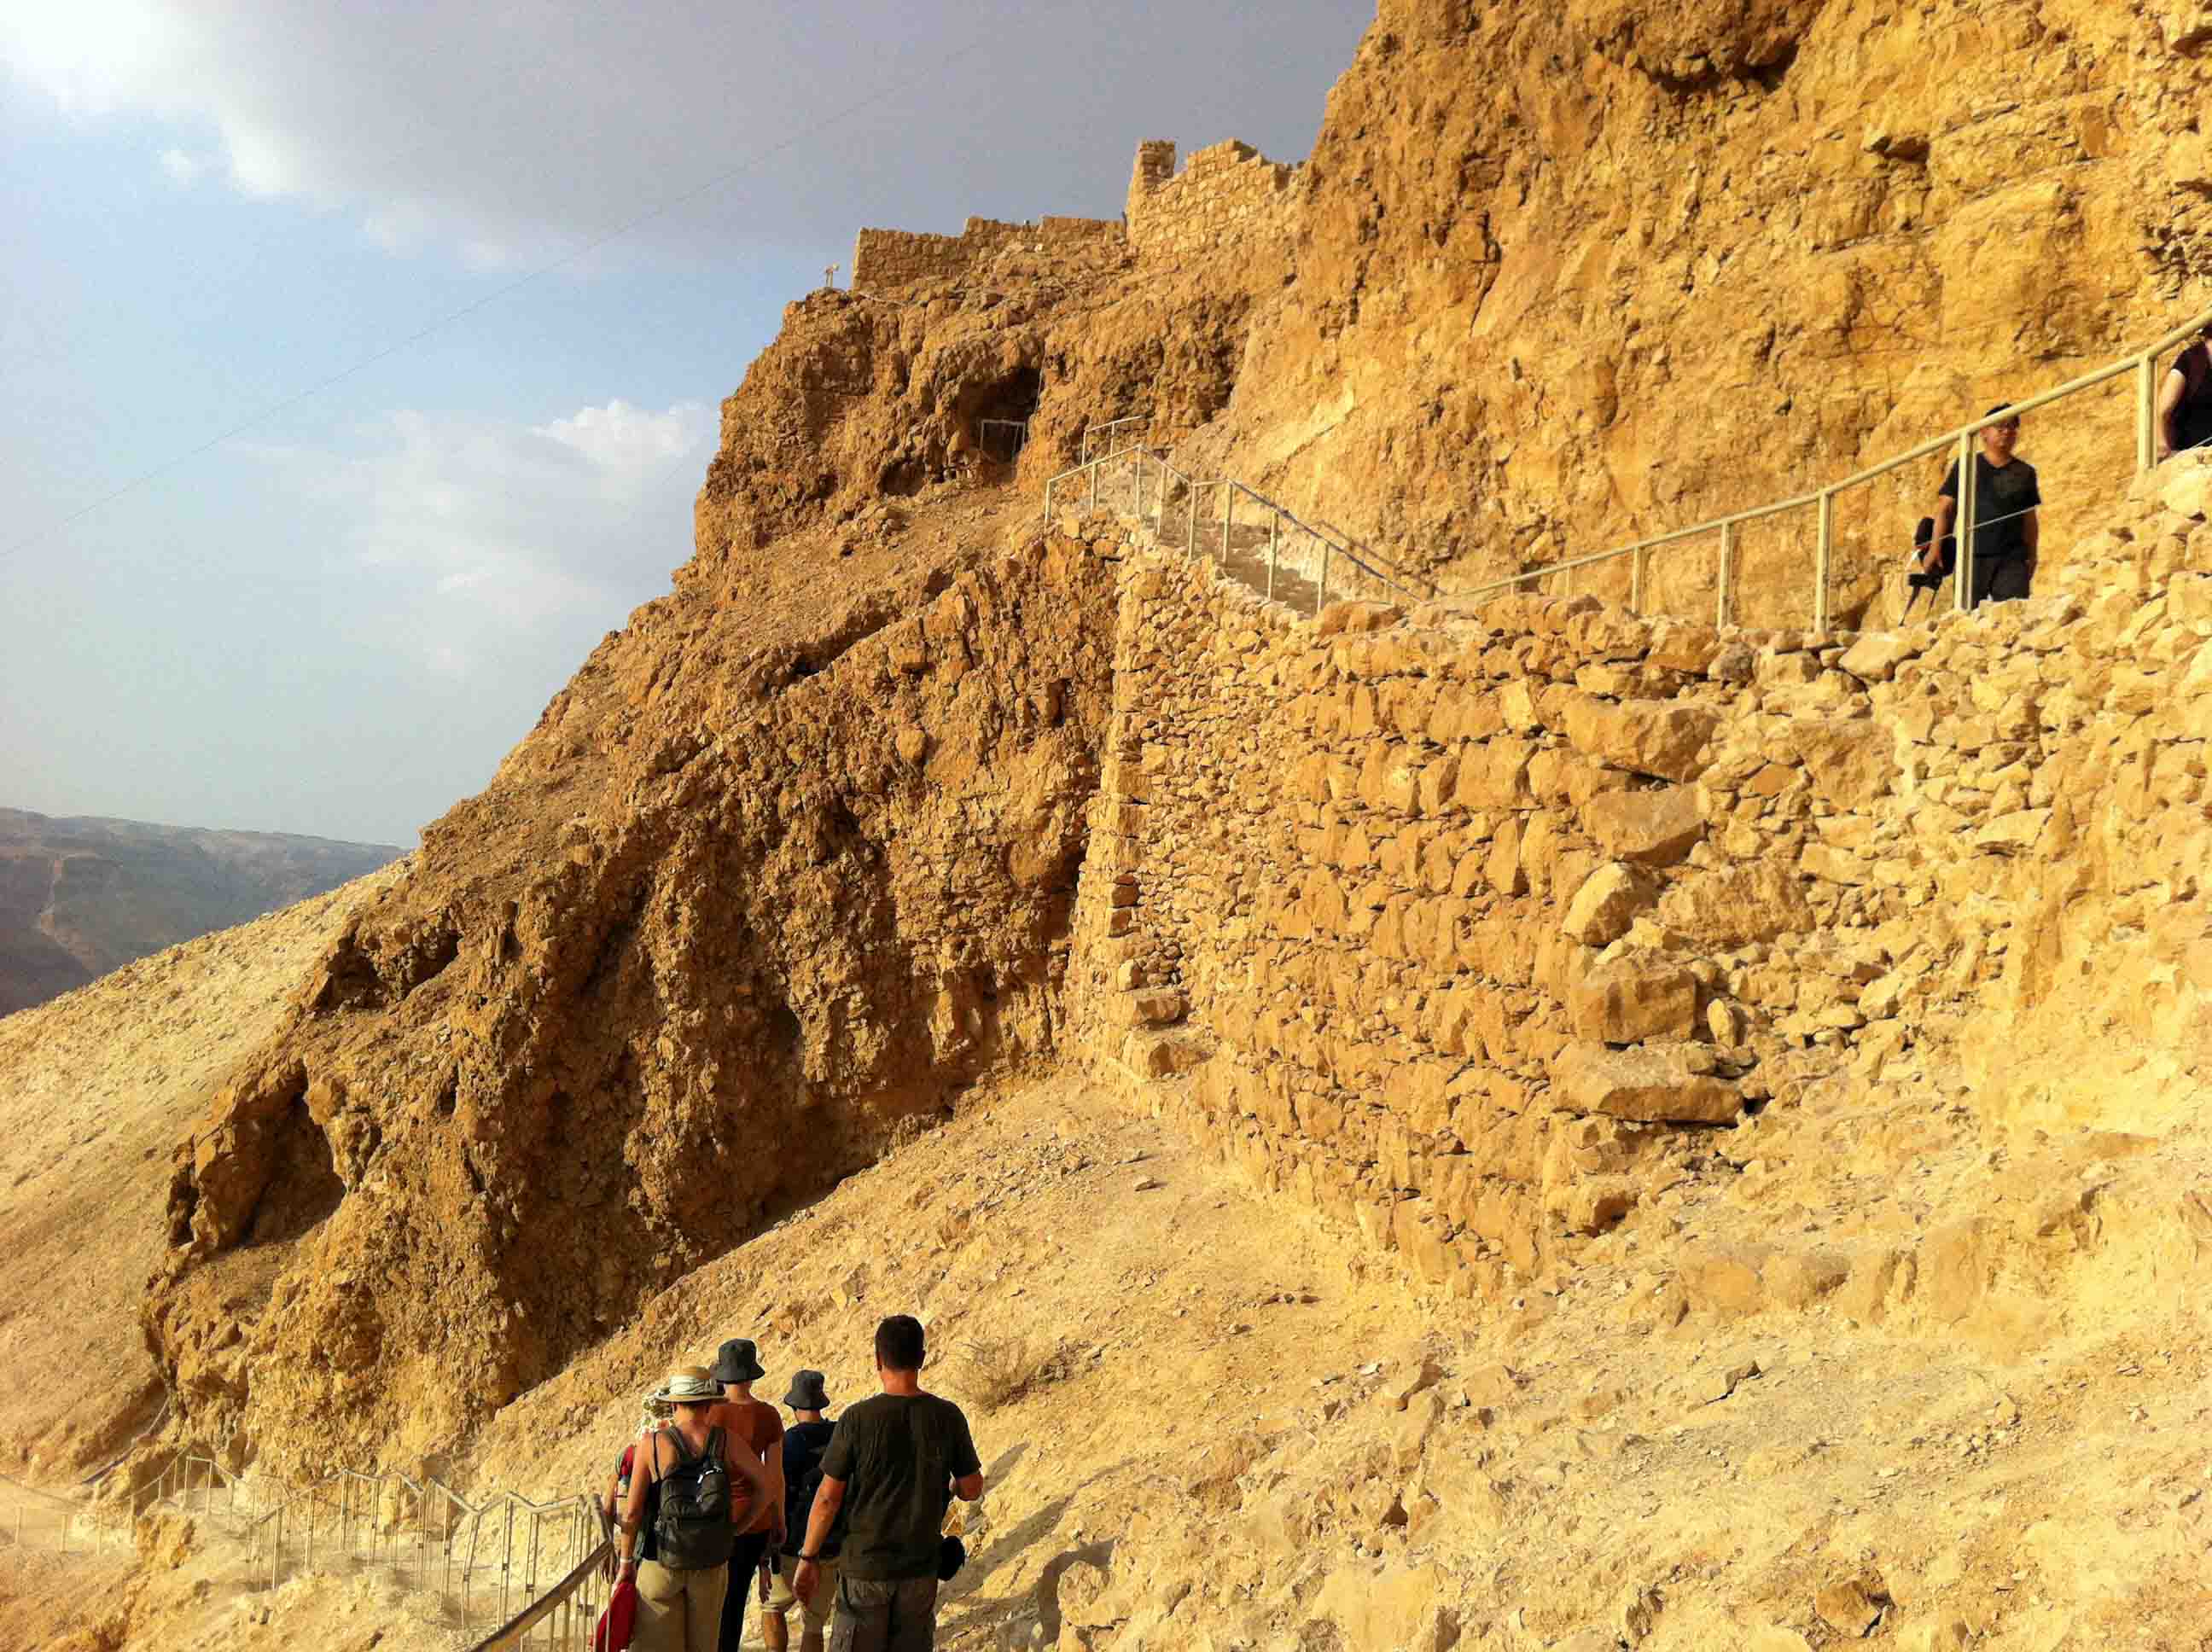 Hiking to the Ancient Fortress of Masada in Israel